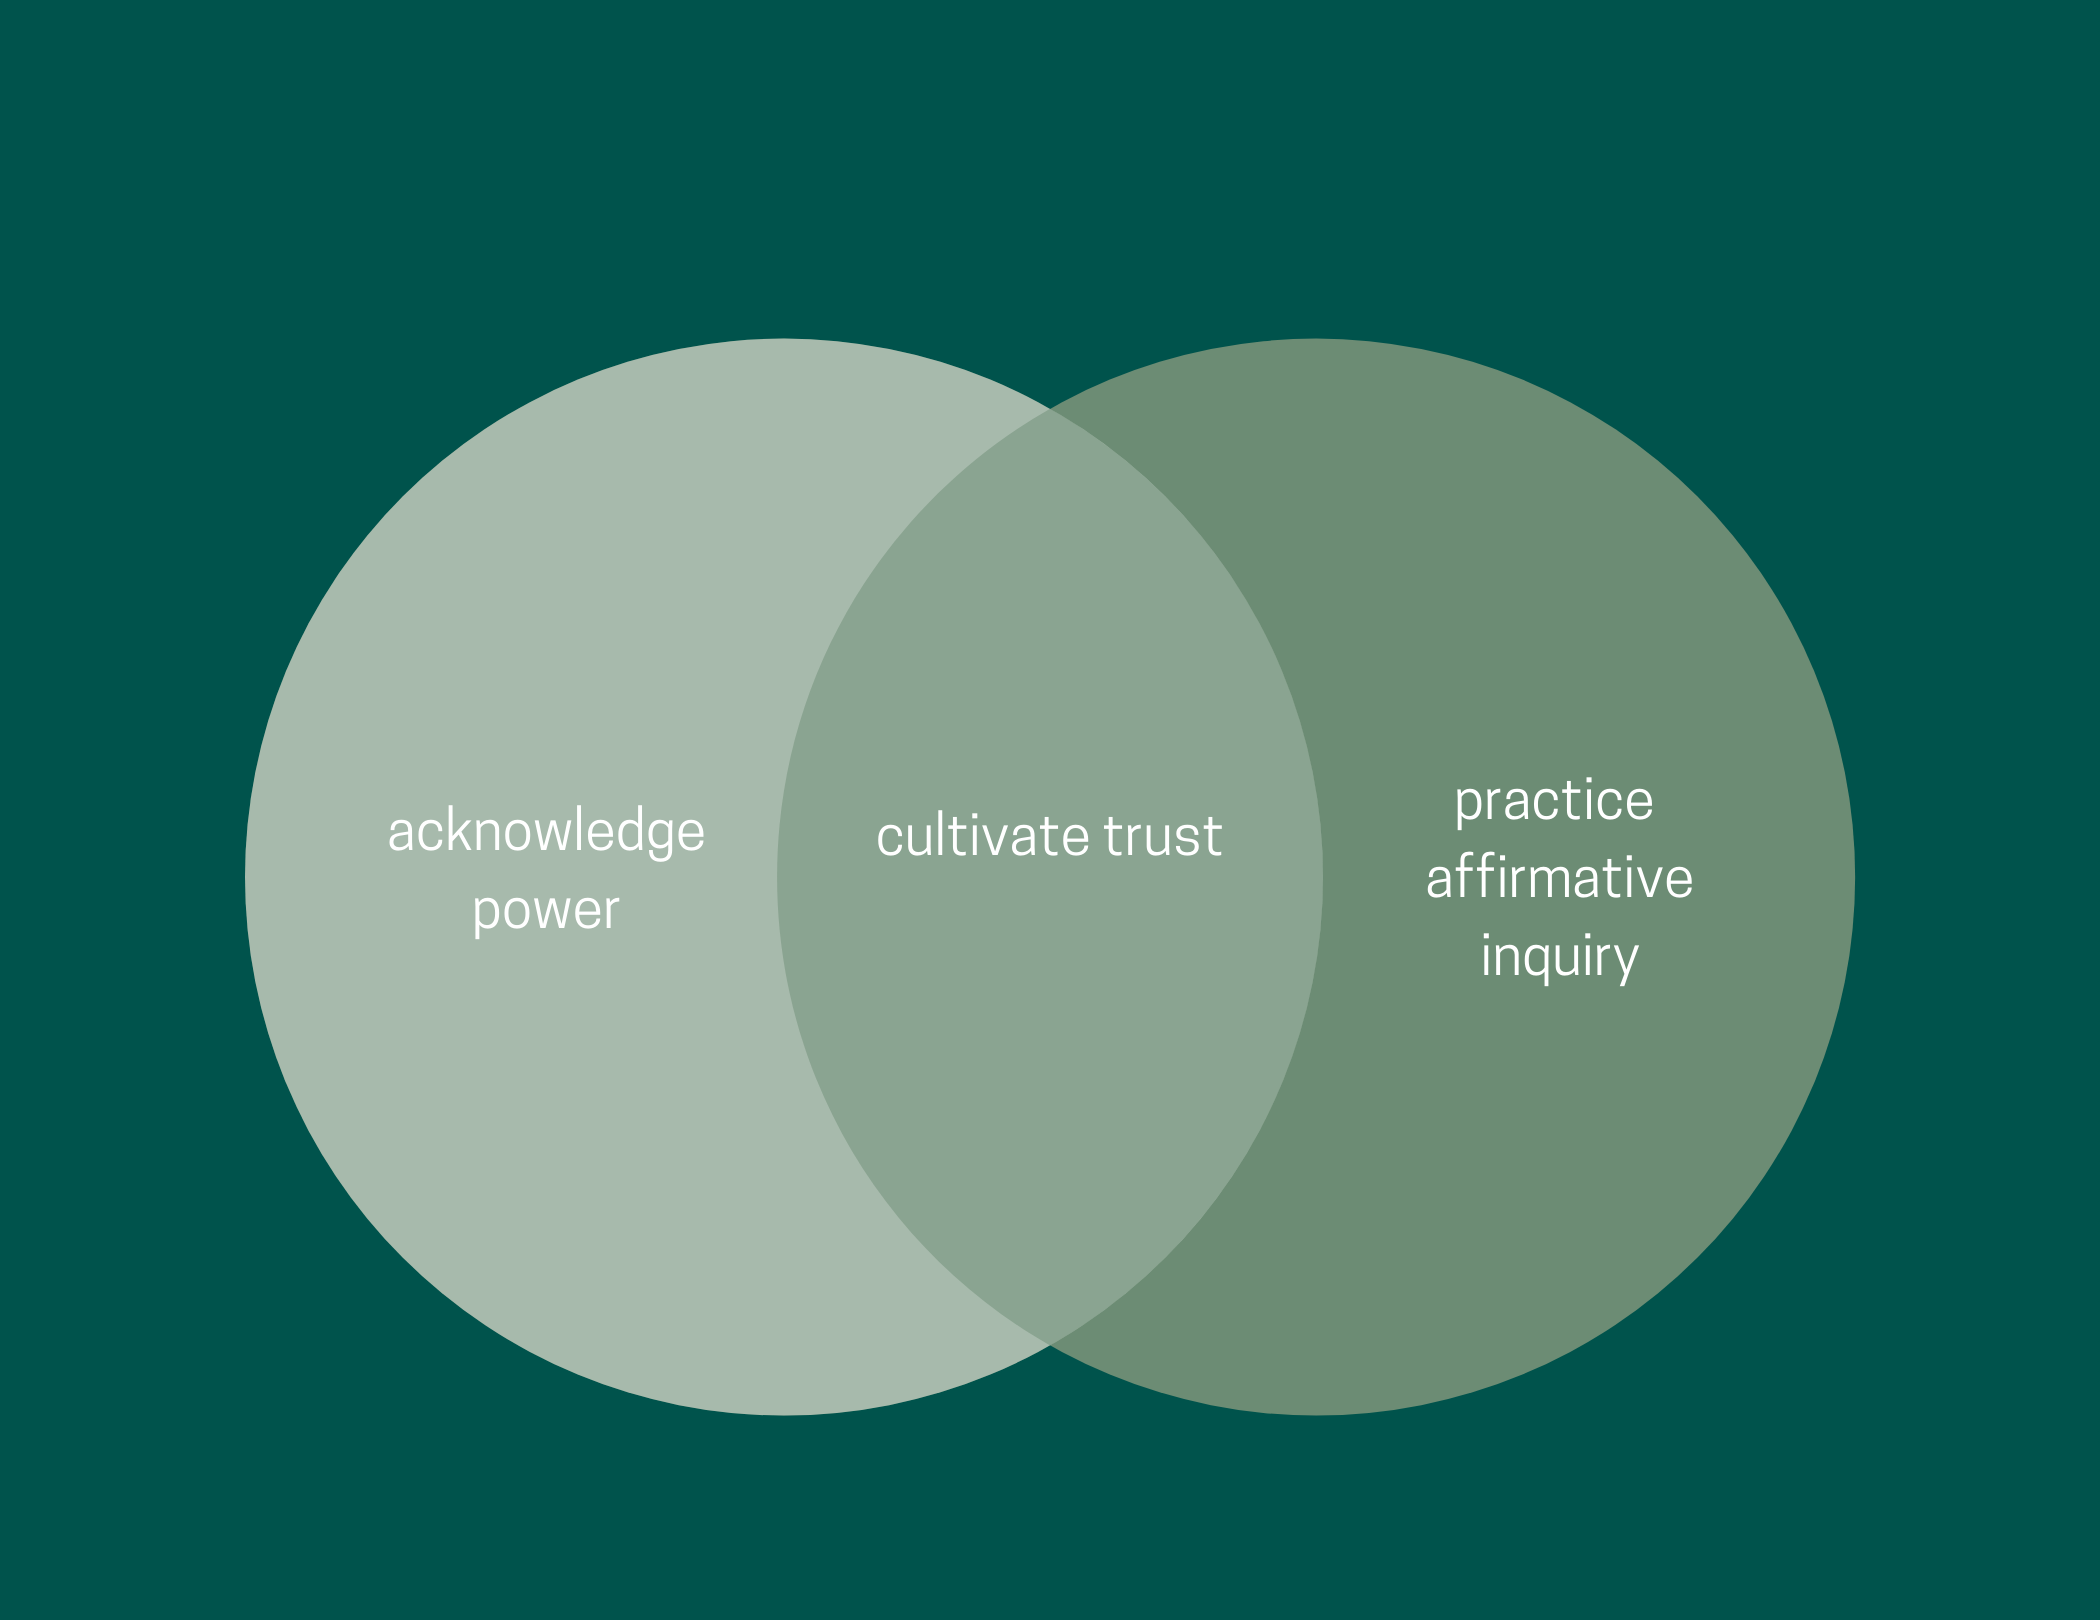 Two circles overlap, one with the phrase "acknowledge power" and the other with the phrase "practice affirmative inquiry." The overlapping section has the phrase "cultivate trust."